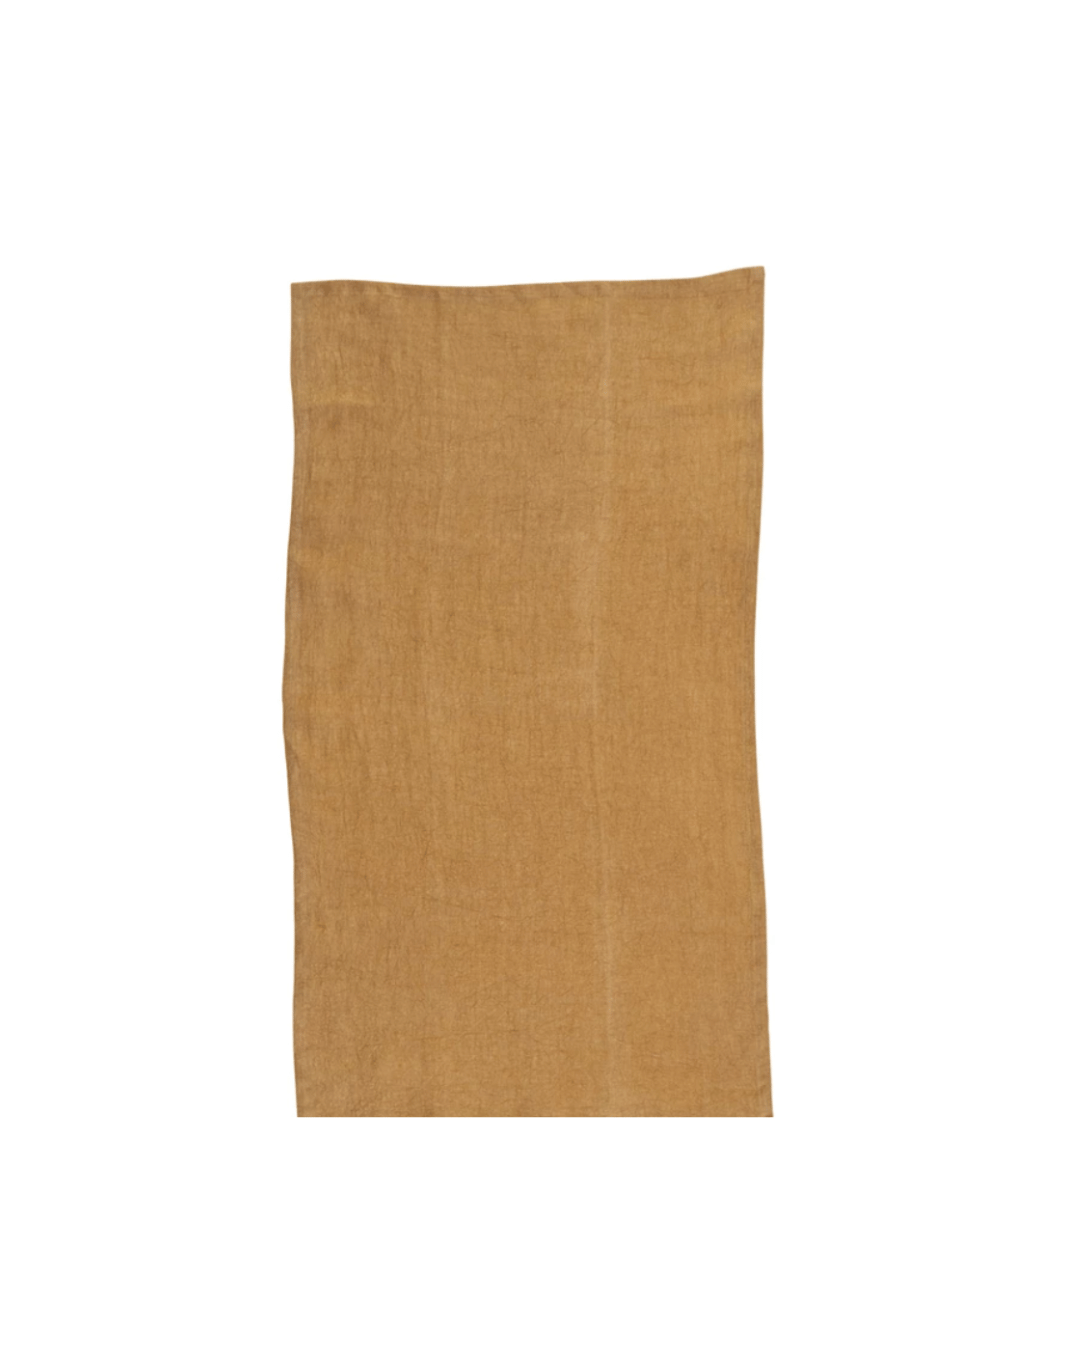 A square piece of plain brown burlap fabric isolated on a white background, reminiscent of the rustic decor found in a Scottsdale Arizona bungalow is like the Linen Tea Towel Yellow from Creative Co-op.